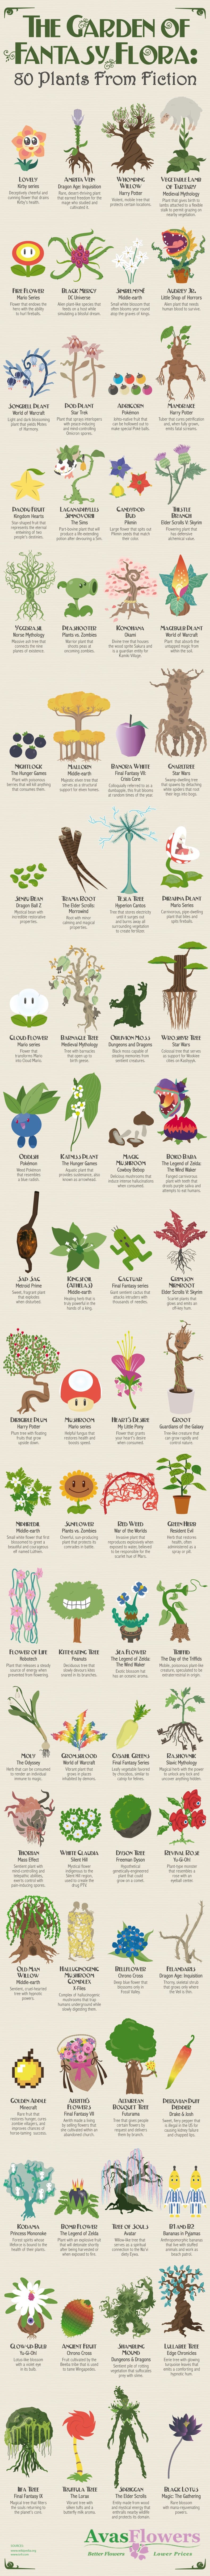 Famous-plants-from-fiction-infographic